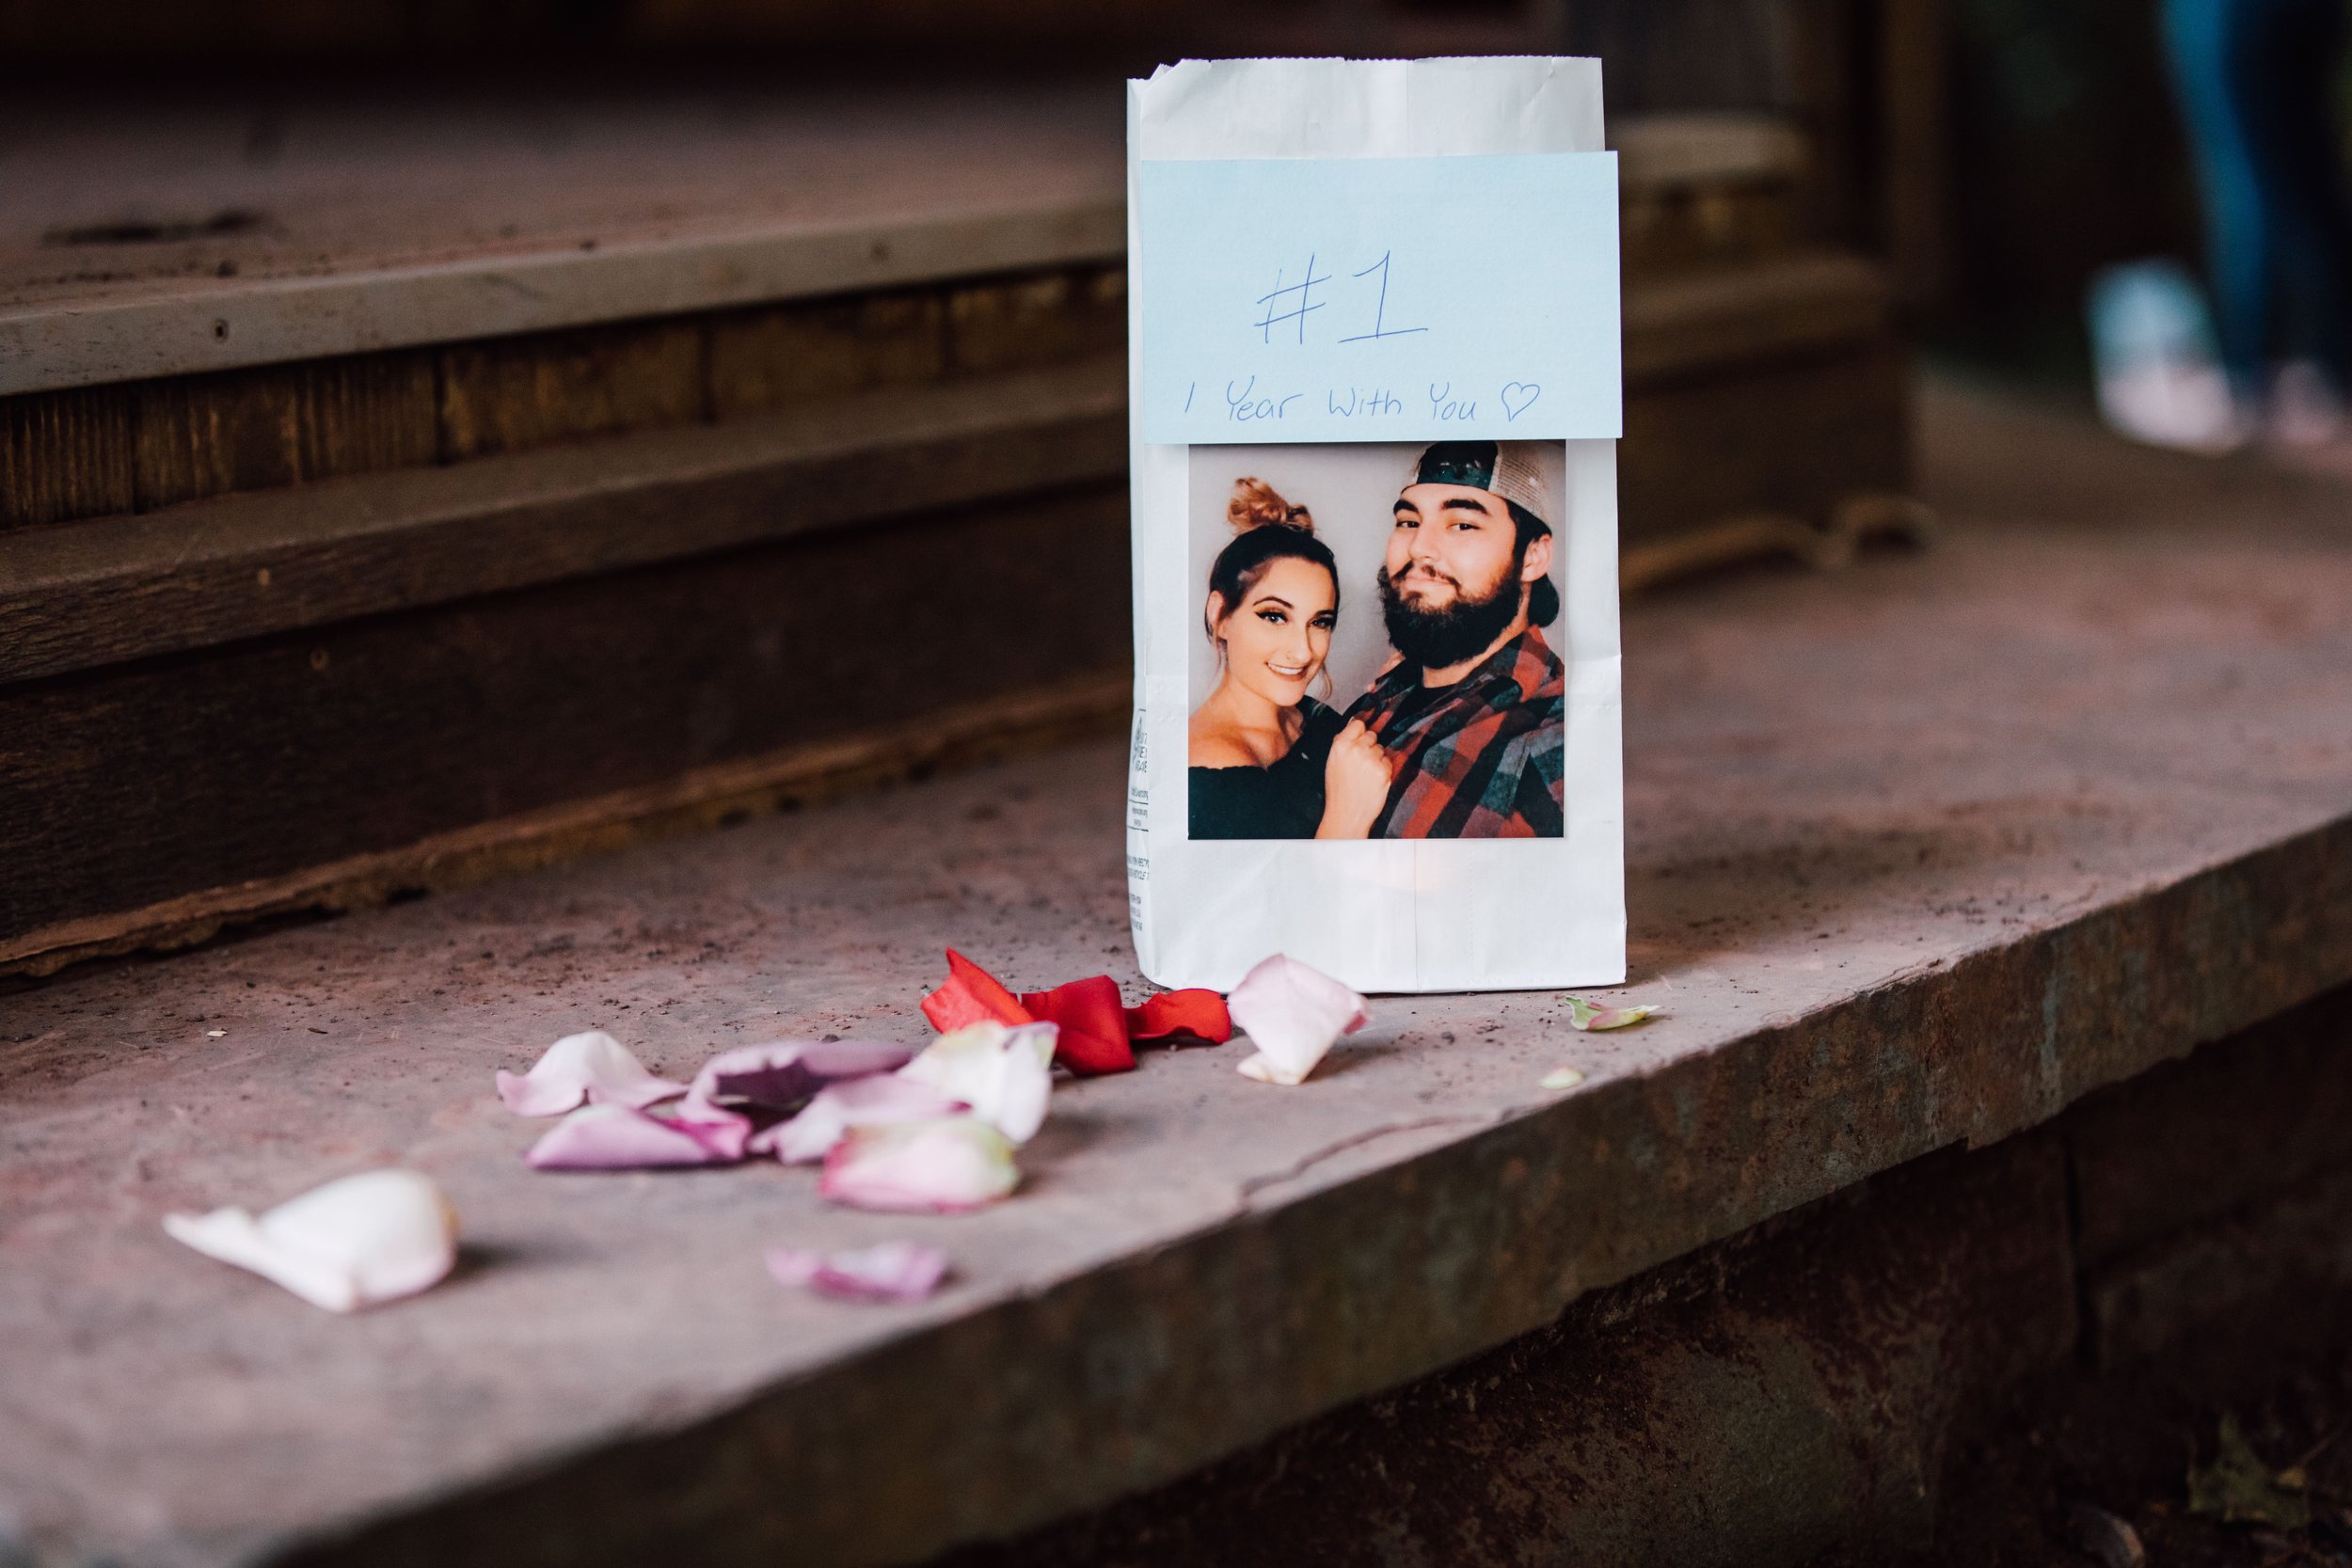  a photo of the engaged couple from their first date is taped to a white paper sack that sits next to flower petals during a proposal at root glen 